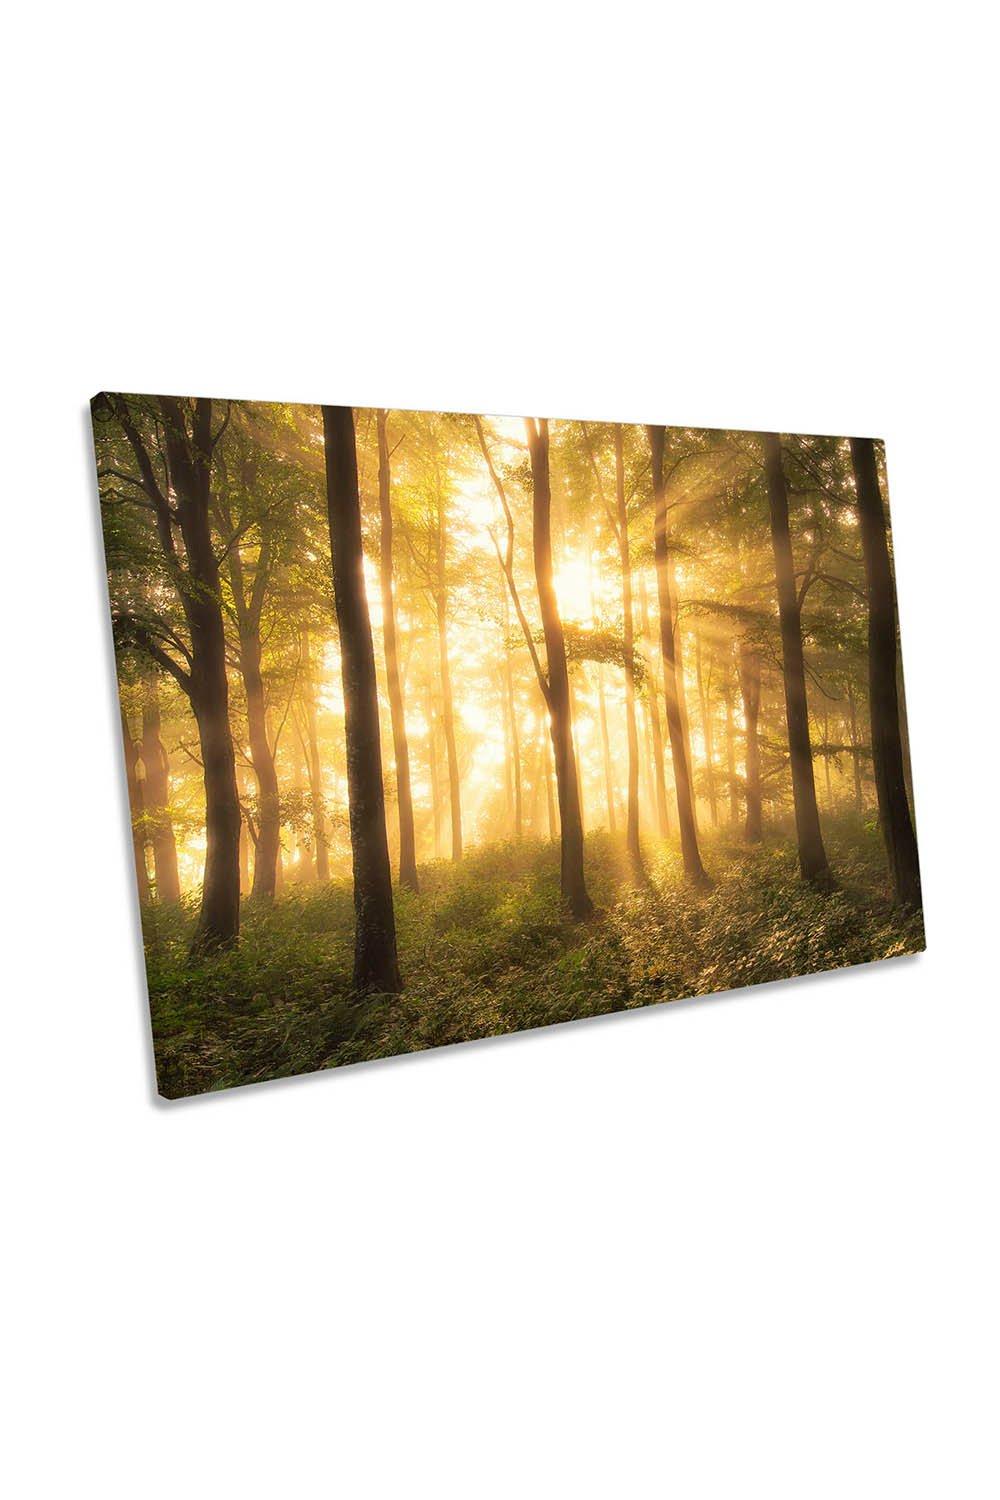 Forest Yellow Sunset Landscape Canvas Wall Art Picture Print